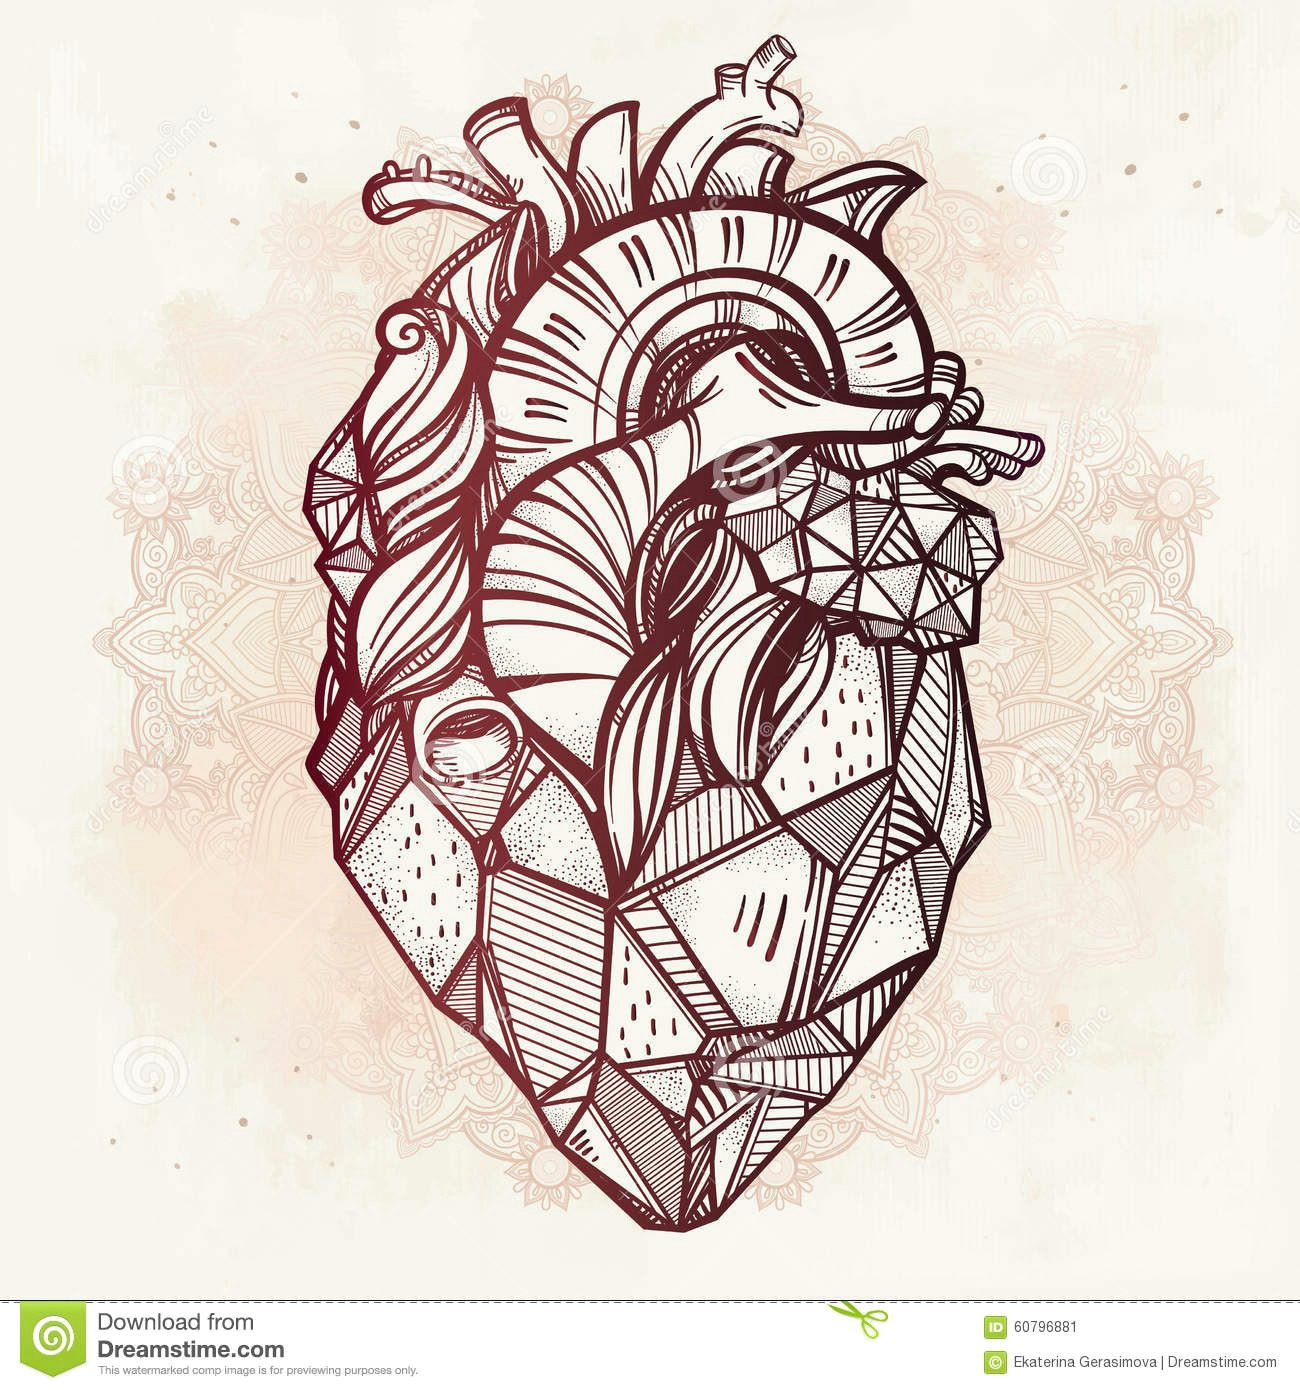 Drawing A Heart with Text Heart Illustration Art Buscar Con Google Tattoos Ideas Pinterest